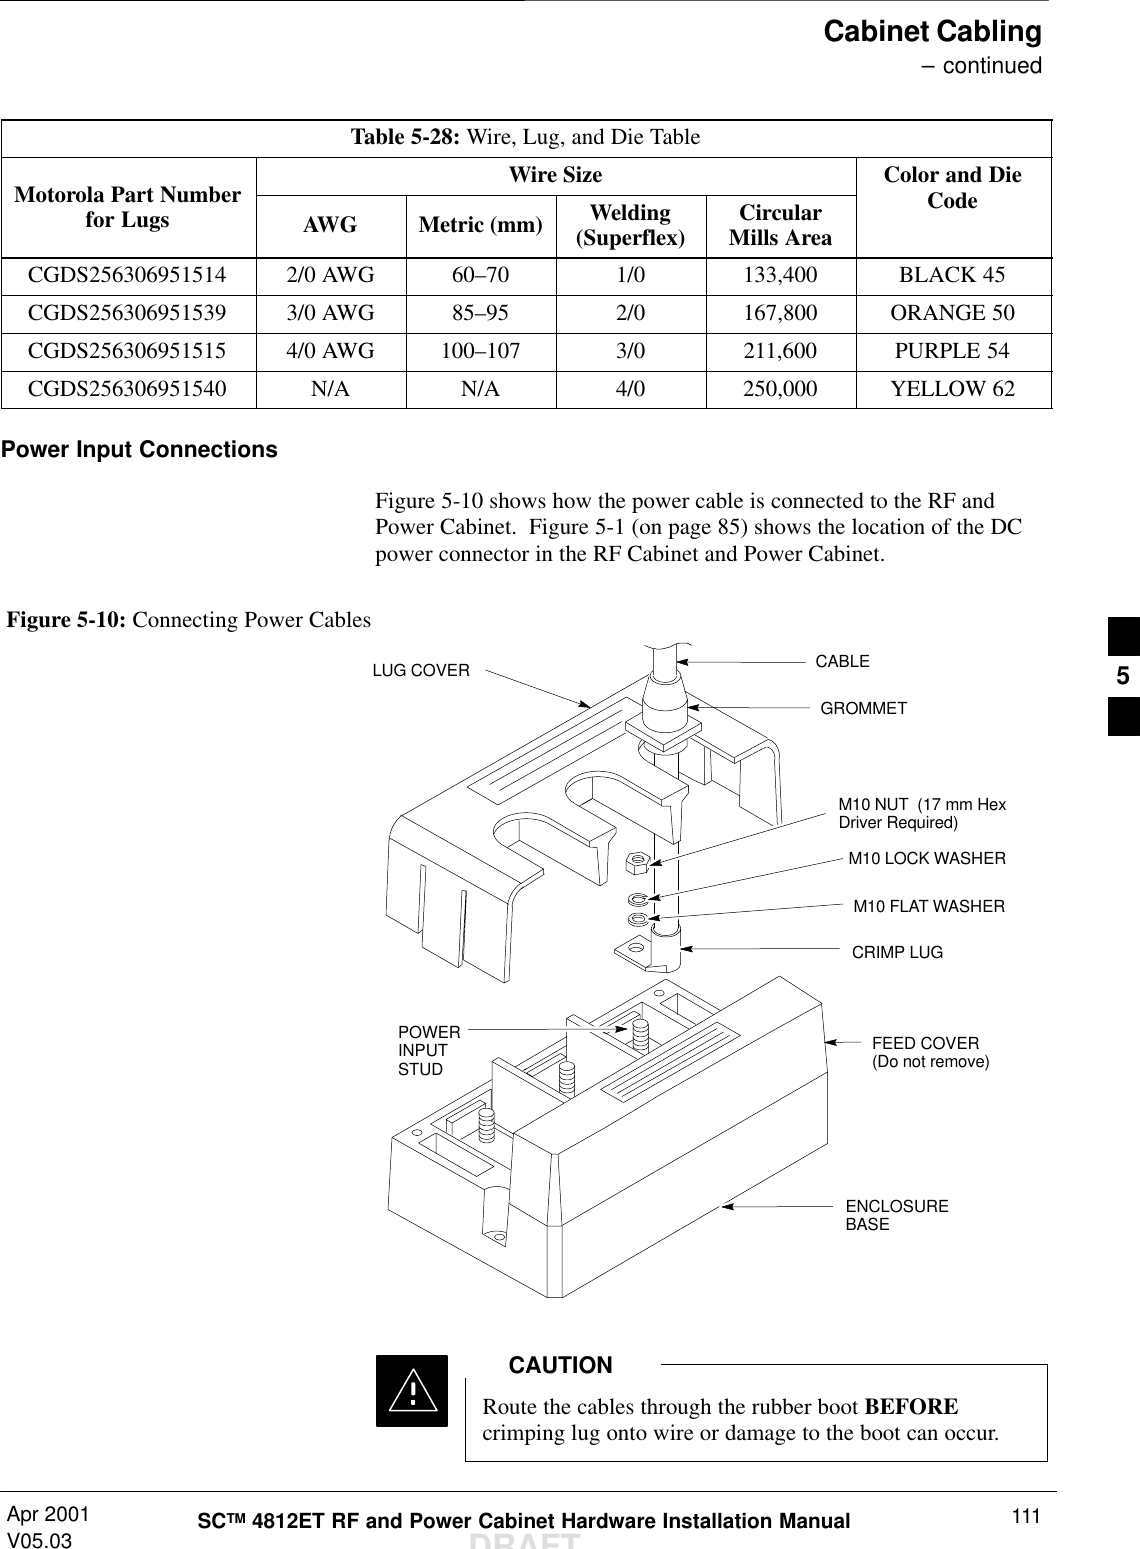 Cabinet Cabling – continuedApr 2001V05.03 111SCTM 4812ET RF and Power Cabinet Hardware Installation ManualDRAFTTable 5-28: Wire, Lug, and Die TableWire Size Color and DieMotorola Part Numberfor Lugs AWG Metric (mm) Welding(Superflex) CircularMills AreaCodeCGDS256306951514 2/0 AWG 60–70 1/0 133,400 BLACK 45CGDS256306951539 3/0 AWG 85–95 2/0 167,800 ORANGE 50CGDS256306951515 4/0 AWG 100–107 3/0 211,600 PURPLE 54CGDS256306951540 N/A N/A 4/0 250,000 YELLOW 62Power Input Connections Figure 5-10 shows how the power cable is connected to the RF andPower Cabinet.  Figure 5-1 (on page 85) shows the location of the DCpower connector in the RF Cabinet and Power Cabinet.Figure 5-10: Connecting Power CablesCABLEGROMMETLUG COVERM10 NUT  (17 mm HexDriver Required)M10 LOCK WASHERM10 FLAT WASHERCRIMP LUGFEED COVER(Do not remove)ENCLOSUREBASEPOWERINPUTSTUD Route the cables through the rubber boot BEFOREcrimping lug onto wire or damage to the boot can occur.CAUTION5